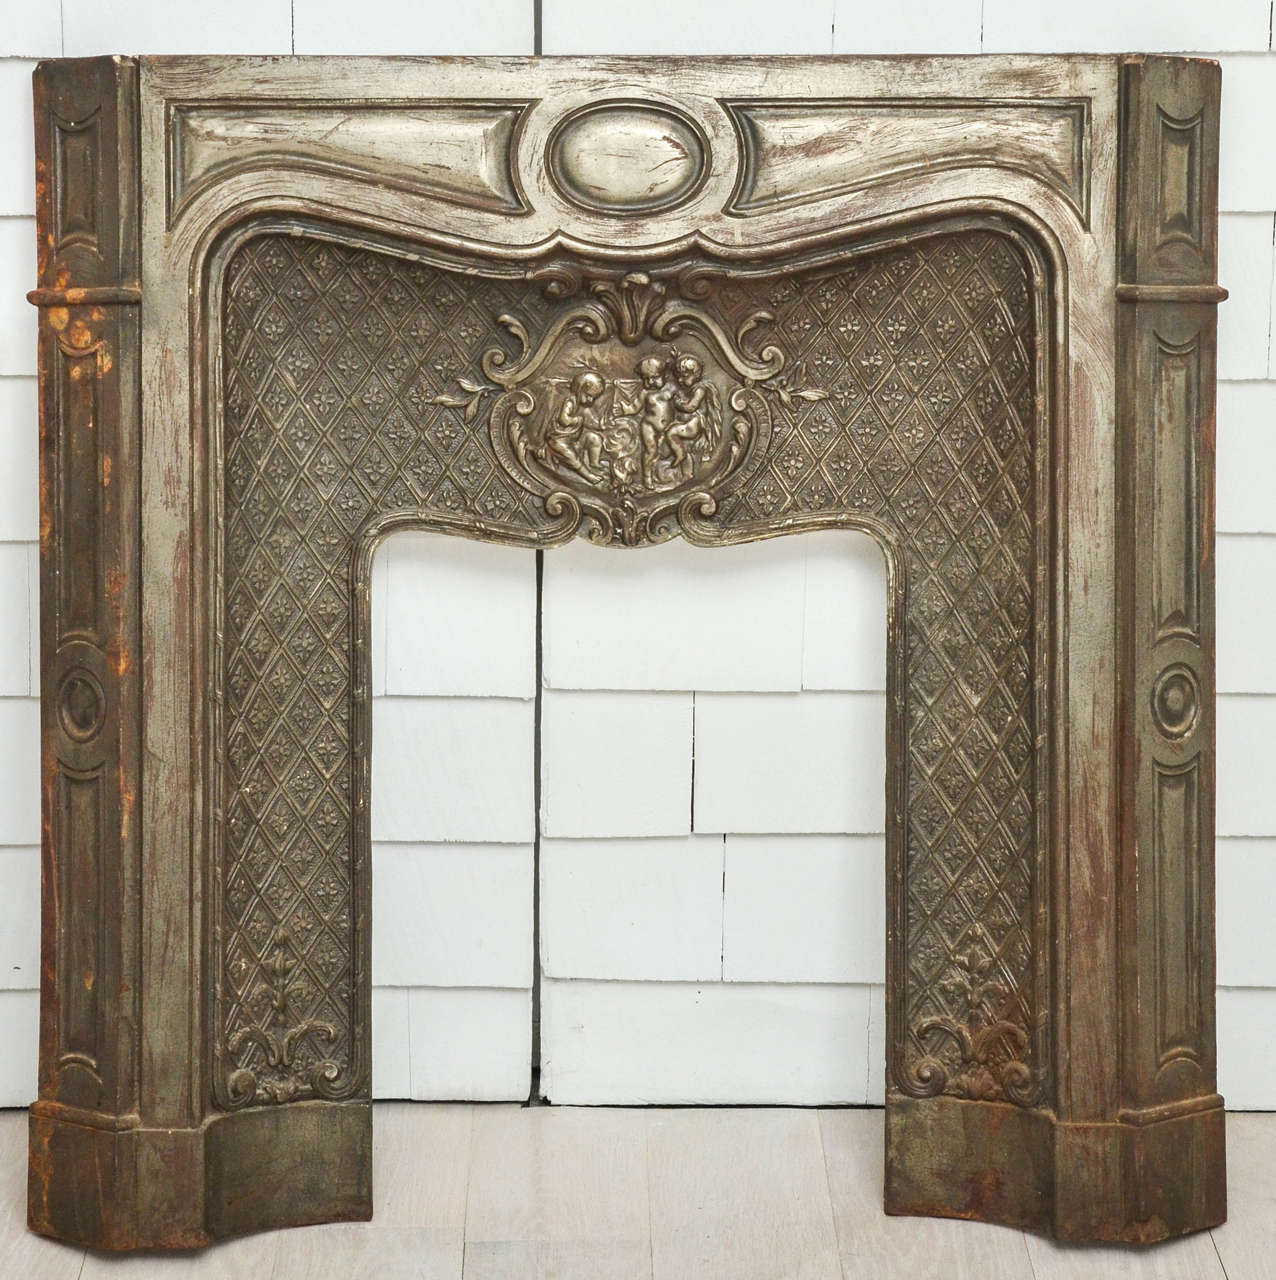 19th century French cast iron fireplace. Featuring a C-scroll cartouche enclosing putti.